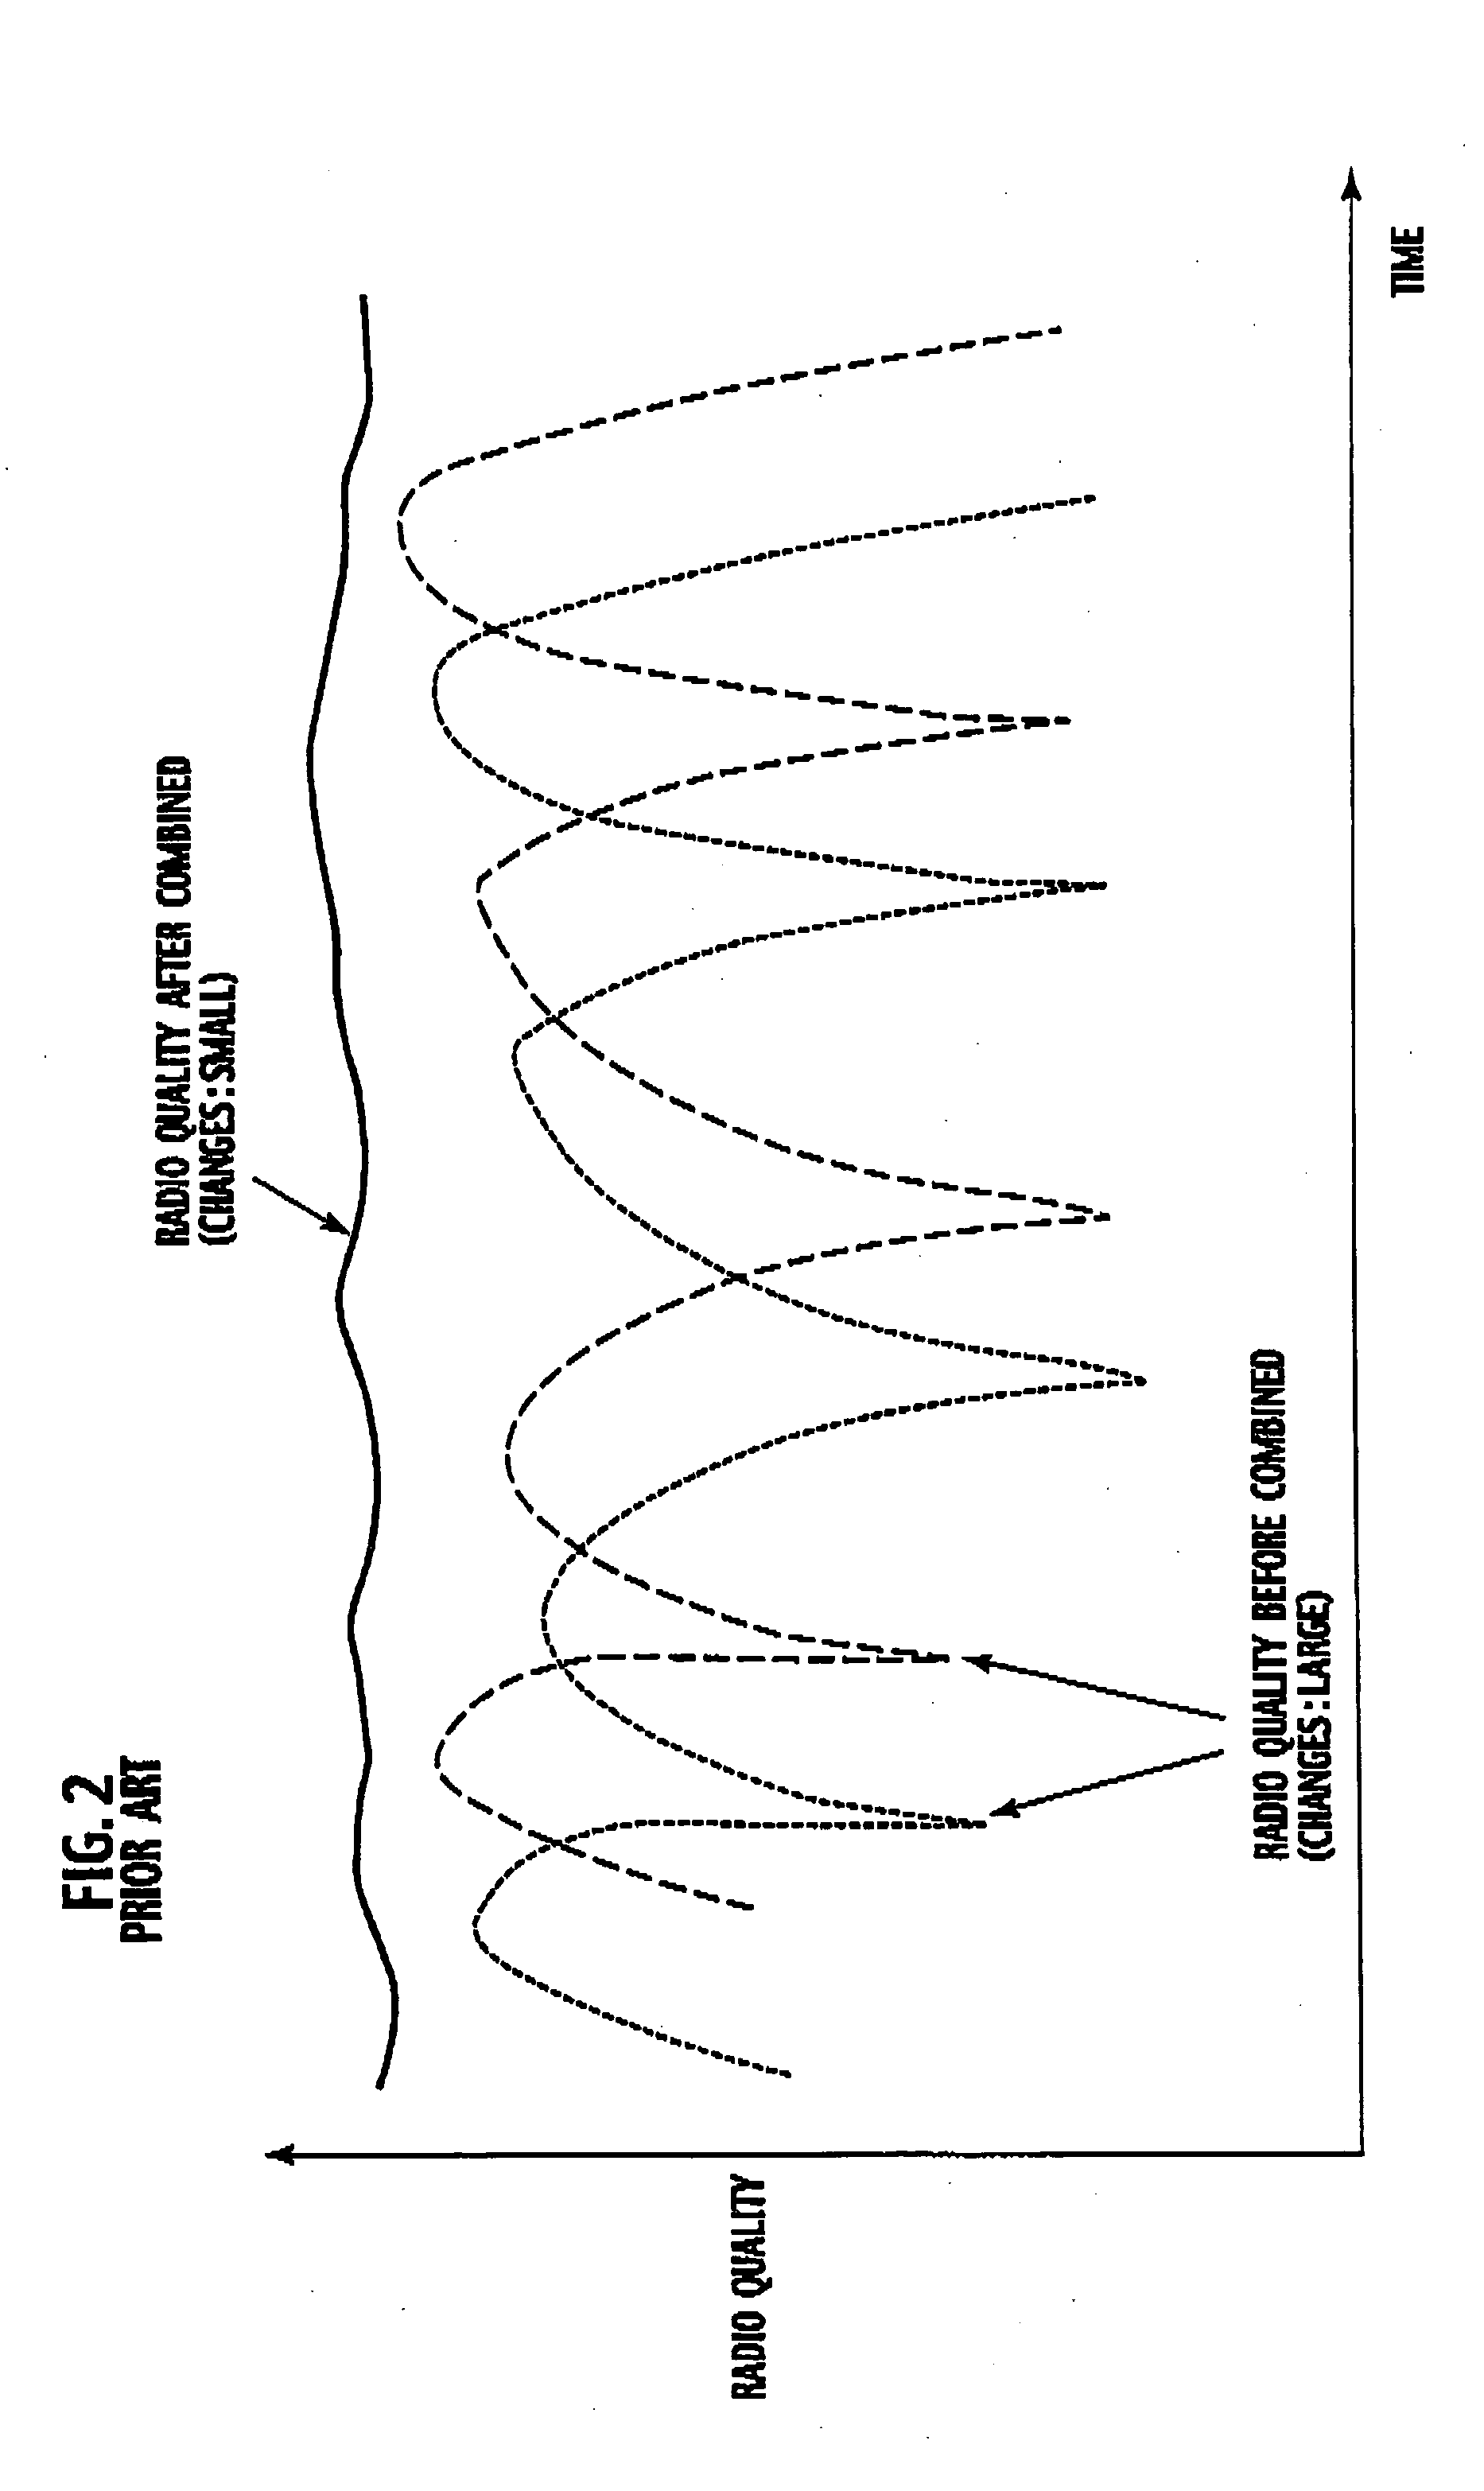 Packet transmission control apparatus and packet transmission control method